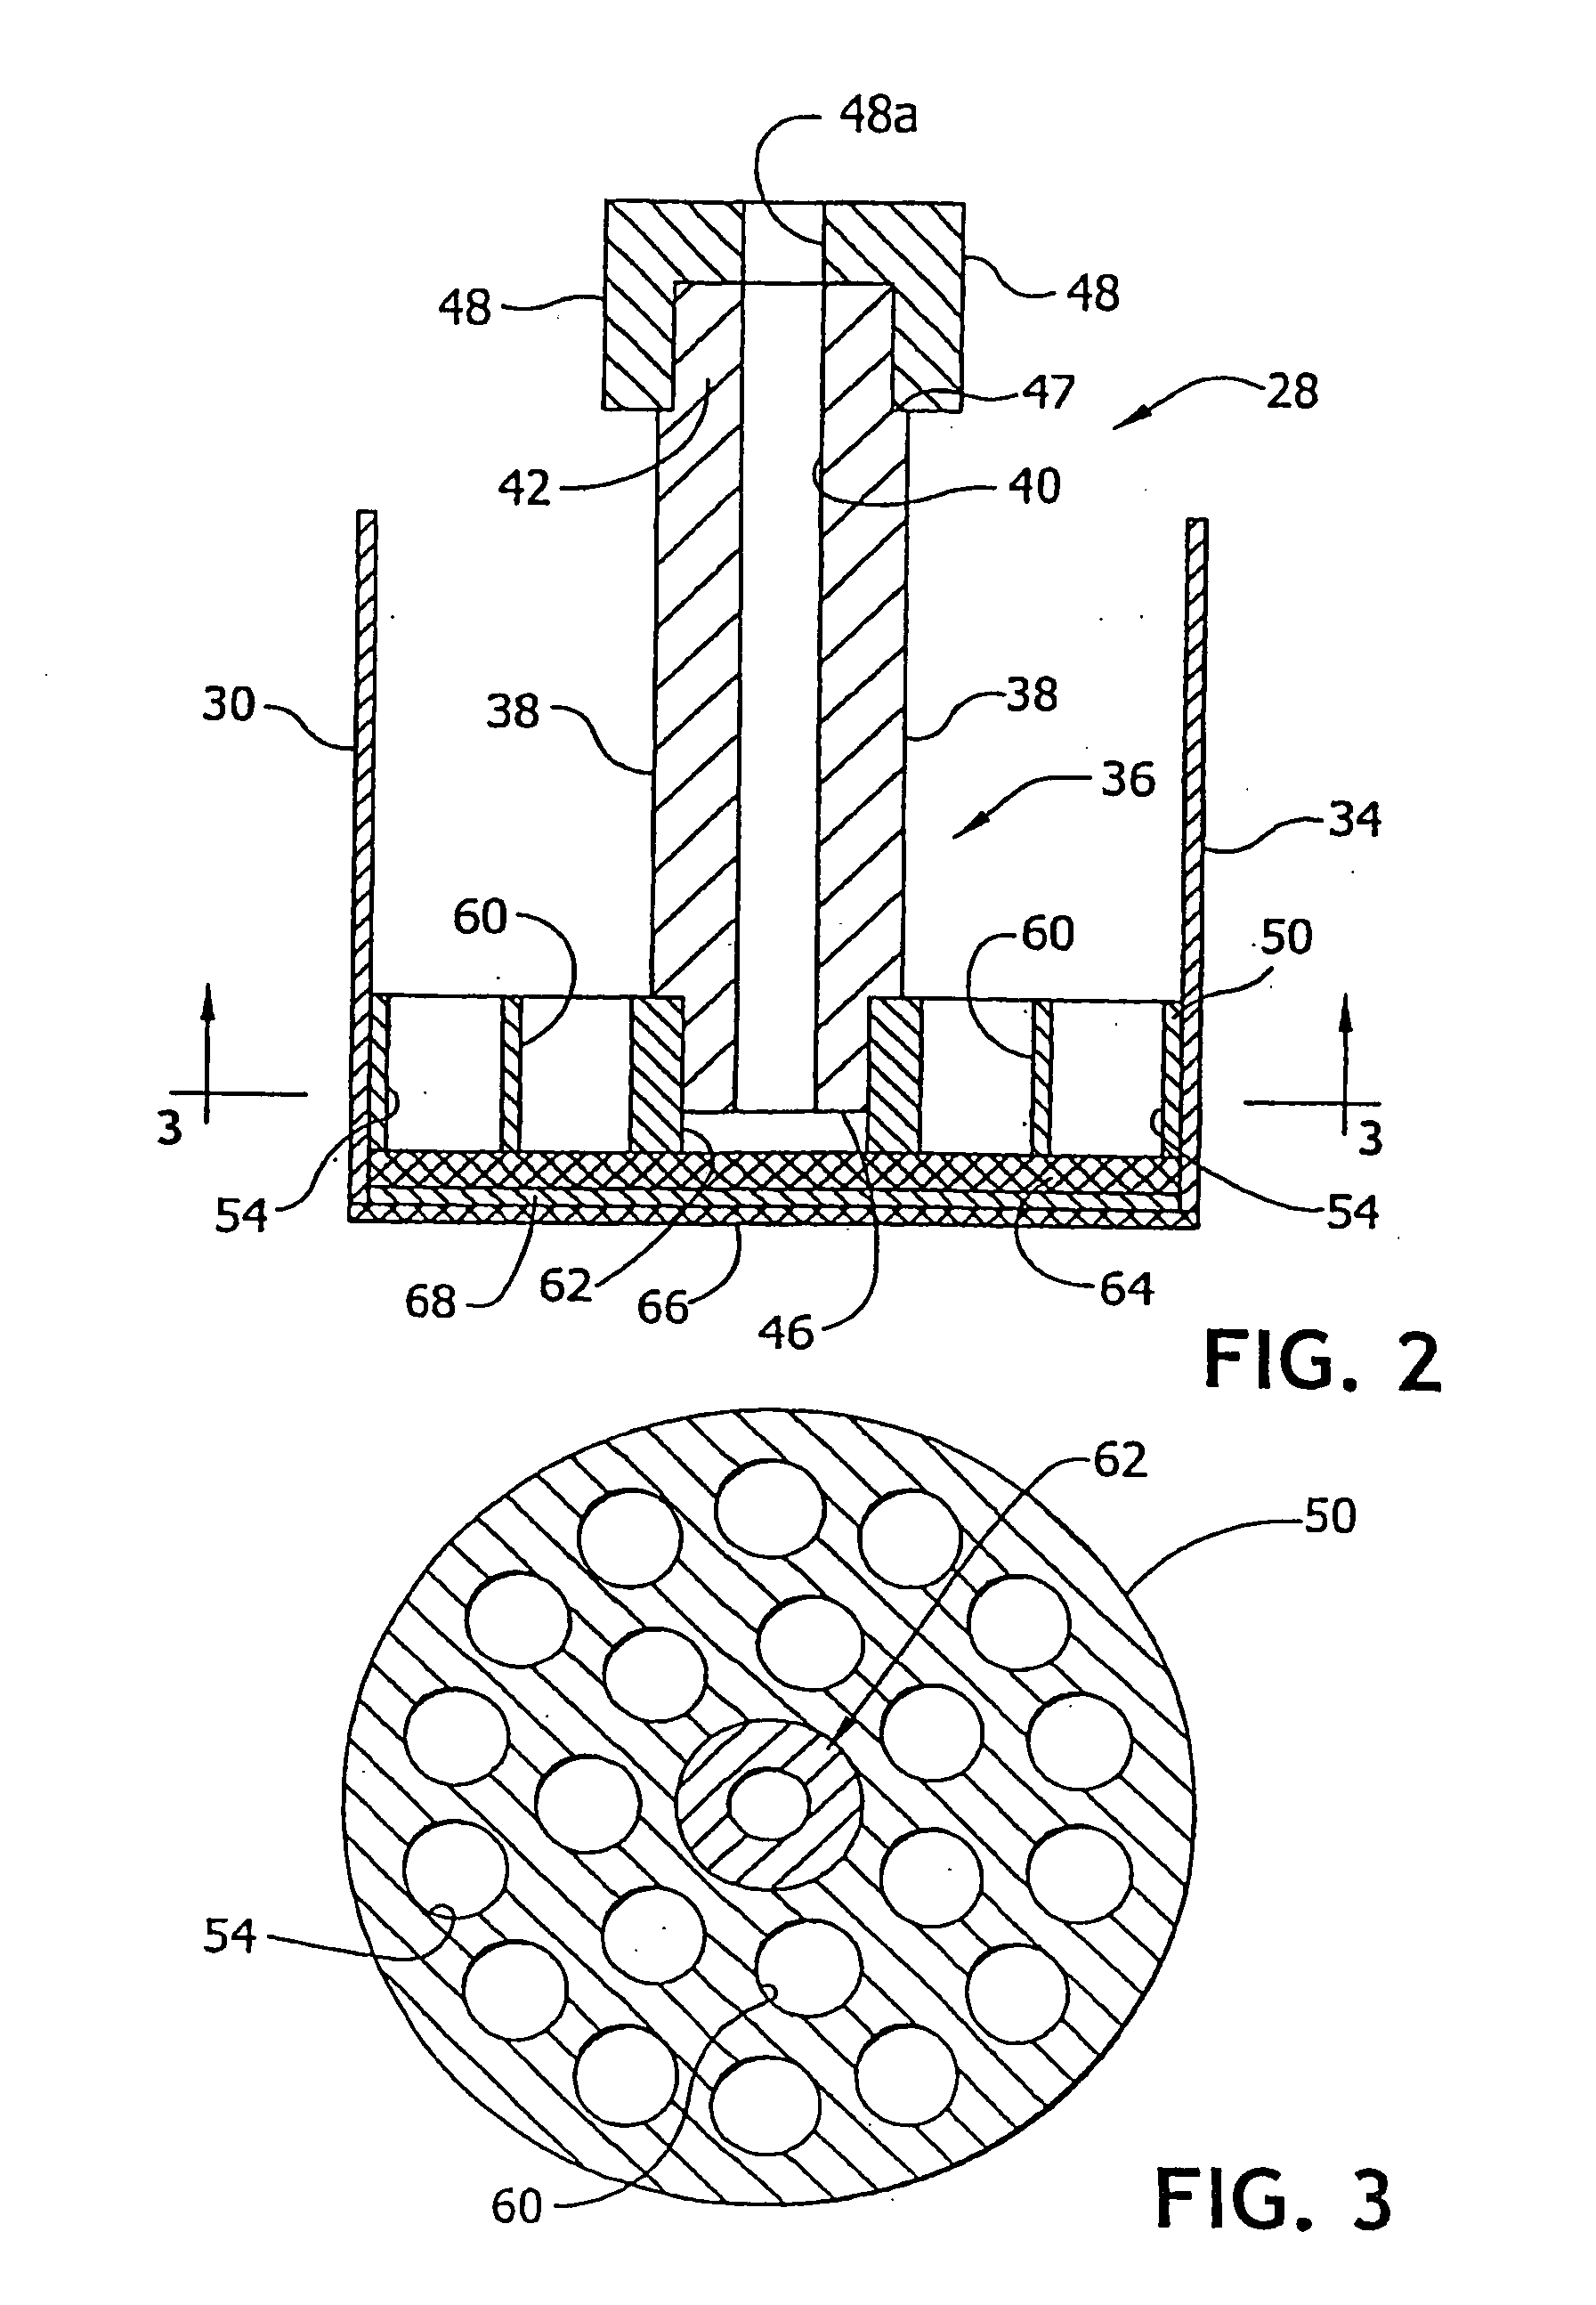 Method of manufacturing and method of marketing gender-specific absorbent articles having liquid-handling properties tailored to each gender